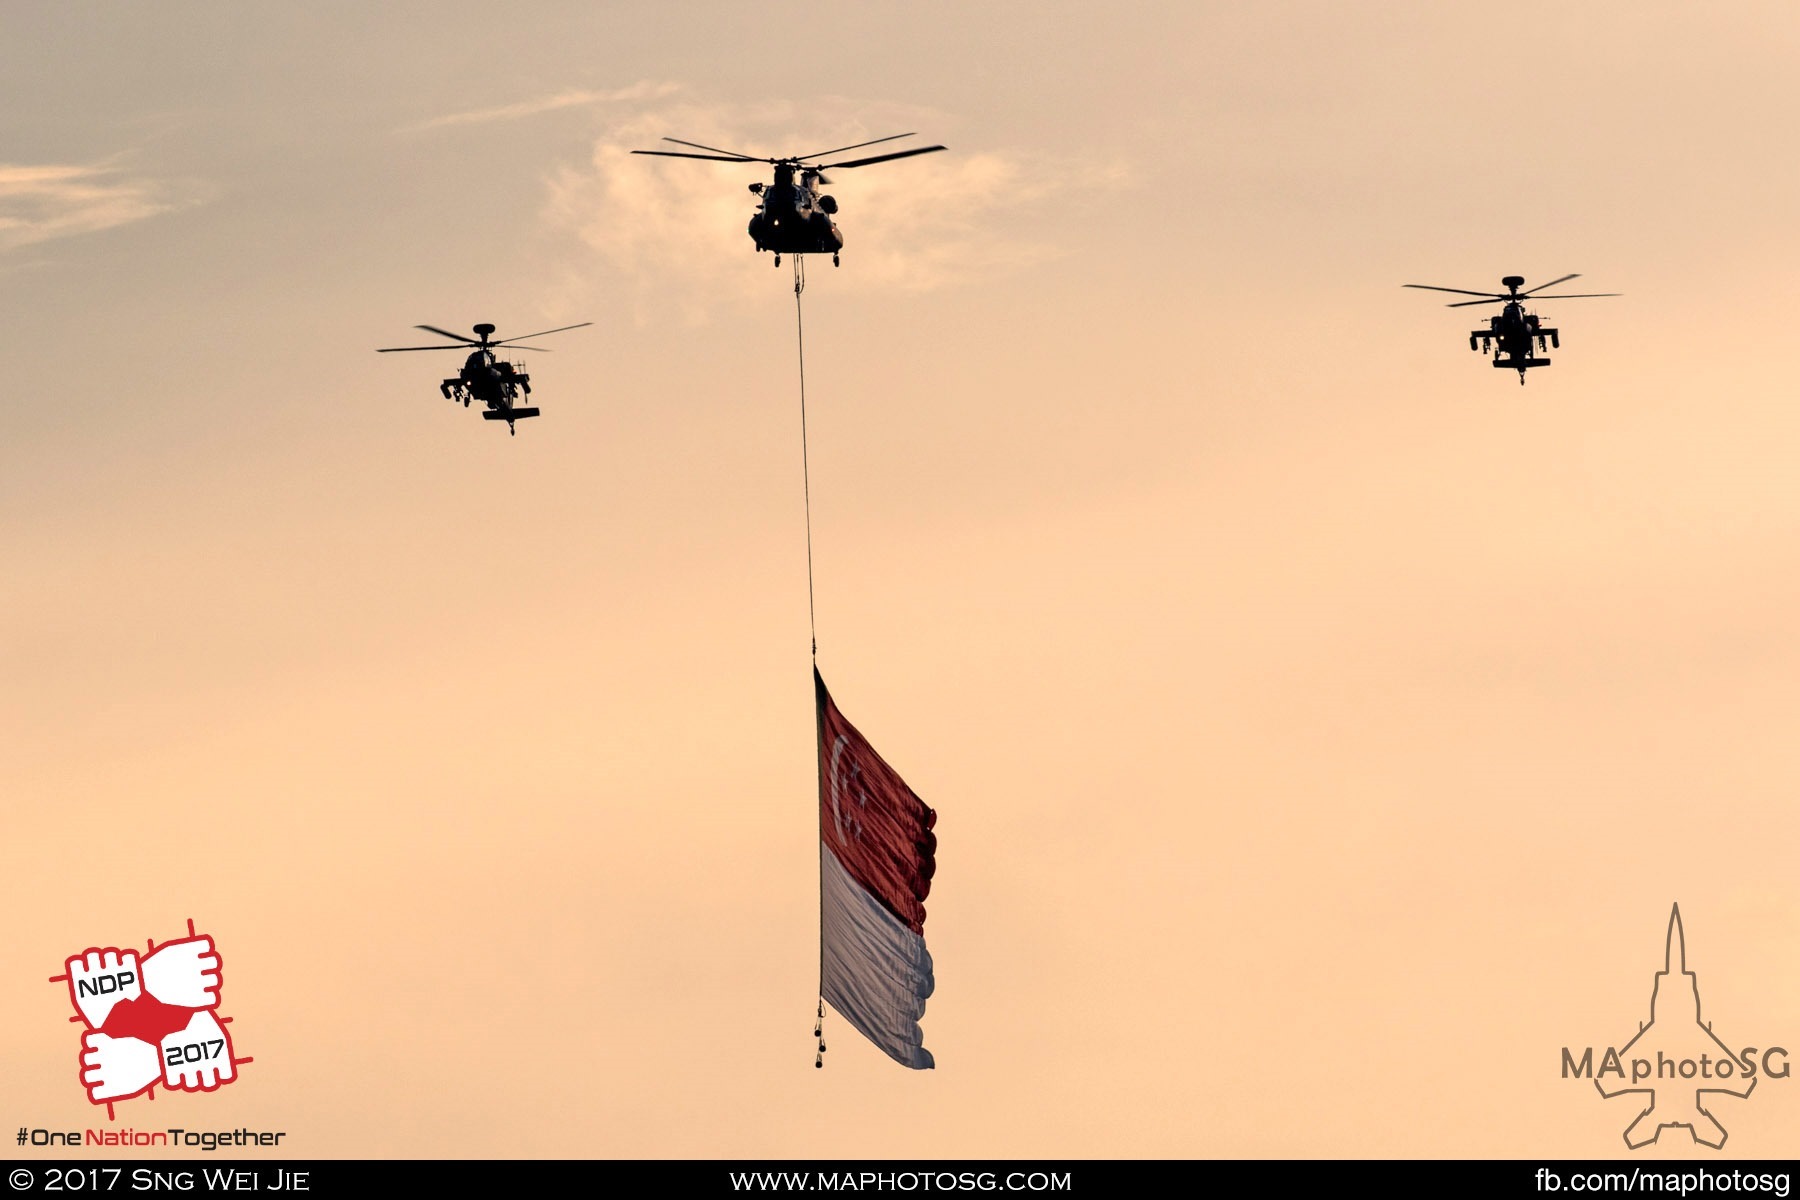 19. RSAF CH-47D Chinook escorted by 2 AH-64D Apache Longbows flies the massive state flag as the National Anthem is being sang.